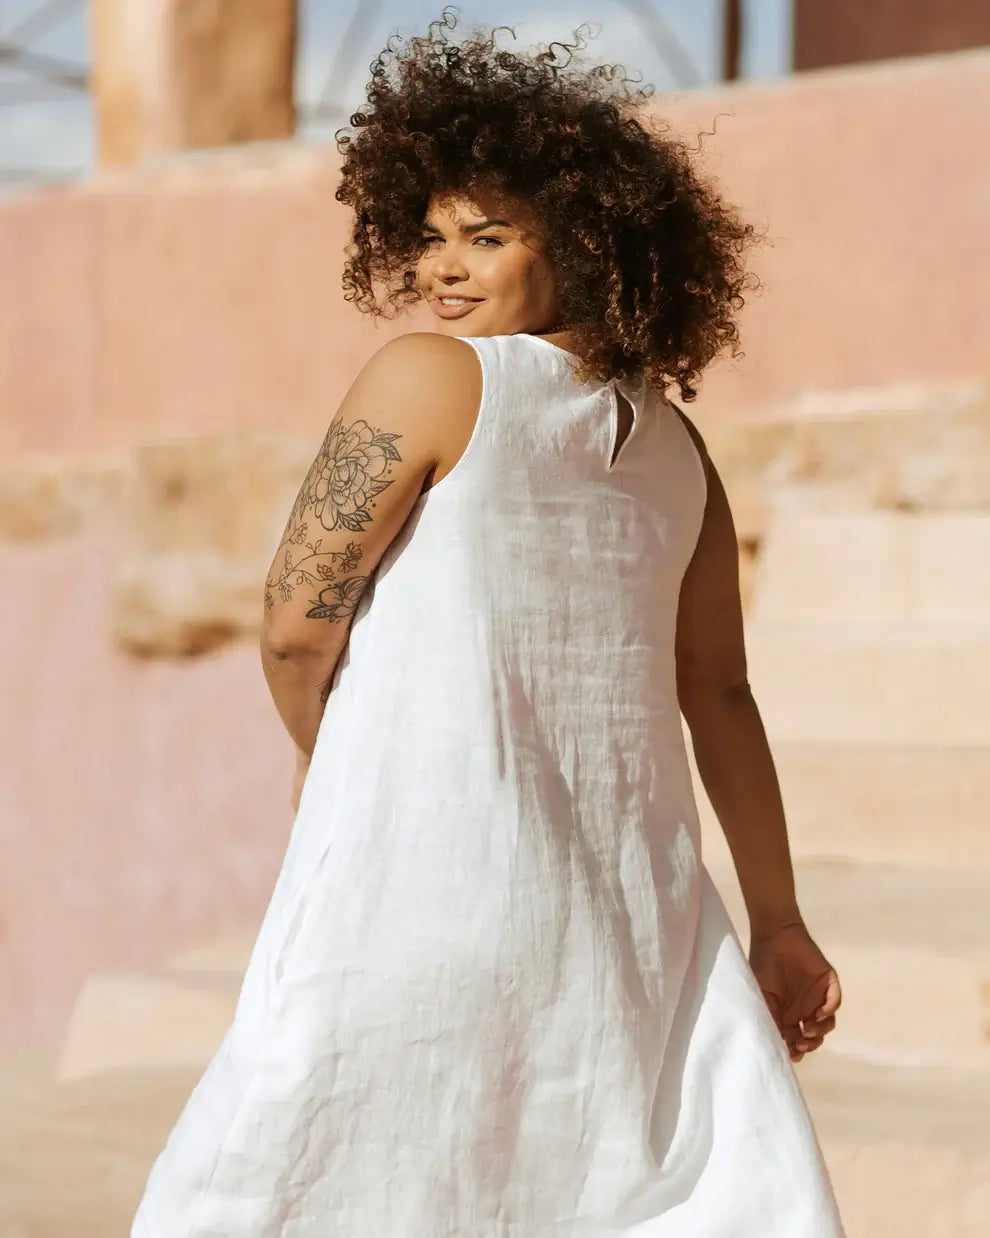 The sustainable women's dress by Magic linen, the white women's linen dress is made with the highest quality, breathable sustainable linen in fair trade. Free fit and flowy women's linen dress, timeless linen dress for women. Best linen dress for hot and humid weather. White linen dress for stylish women from MiliMilu.